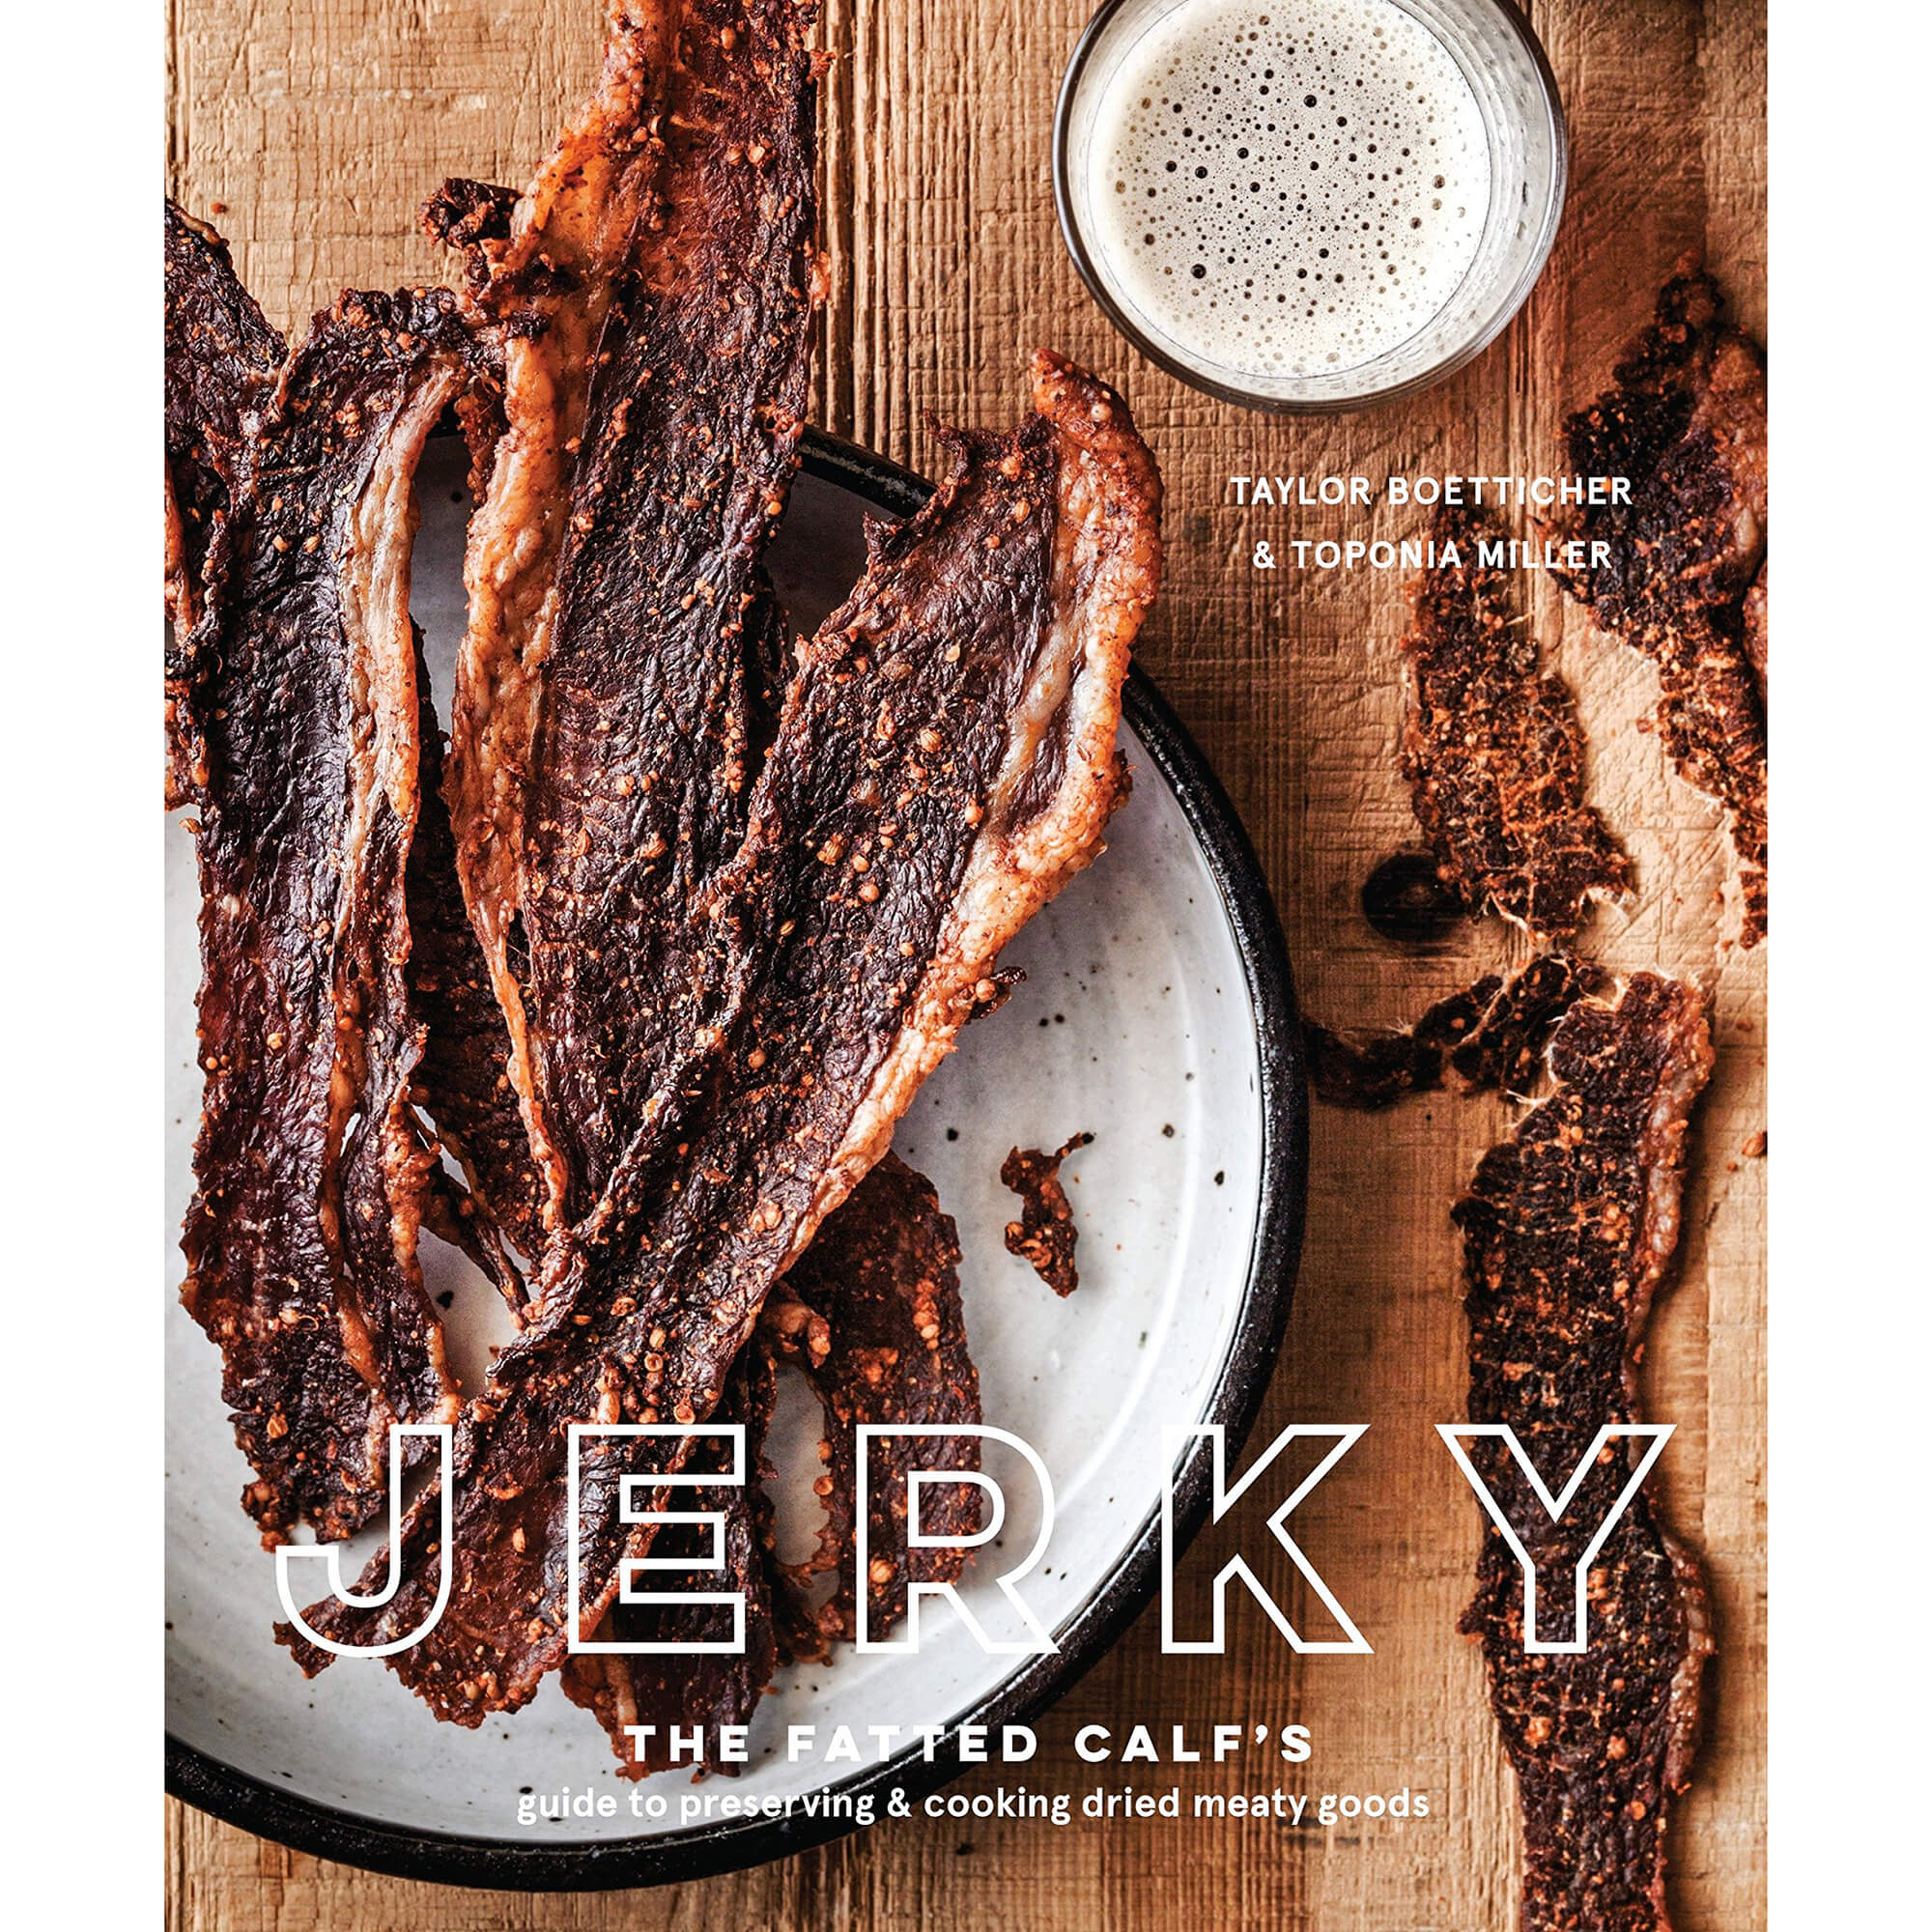 Jerky: The Fatted Calf's guide to preserving & cooking dried meaty goods front cover.